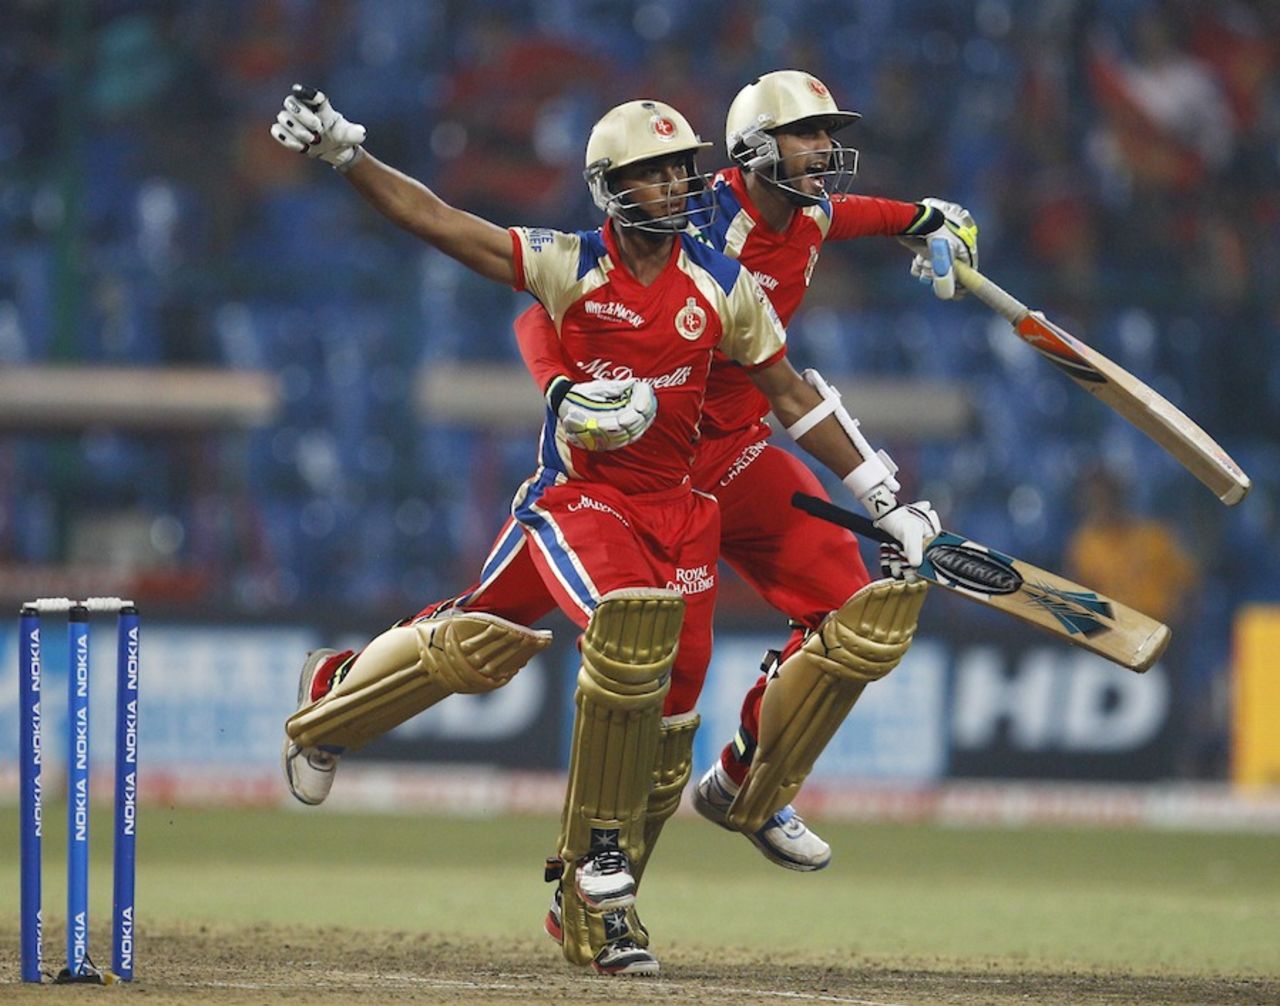 Arun Karthik and S Aravind celebrate after the last-ball six, Royal Challengers Bangalore v South Australia, Champions League T20, October 5, 2011